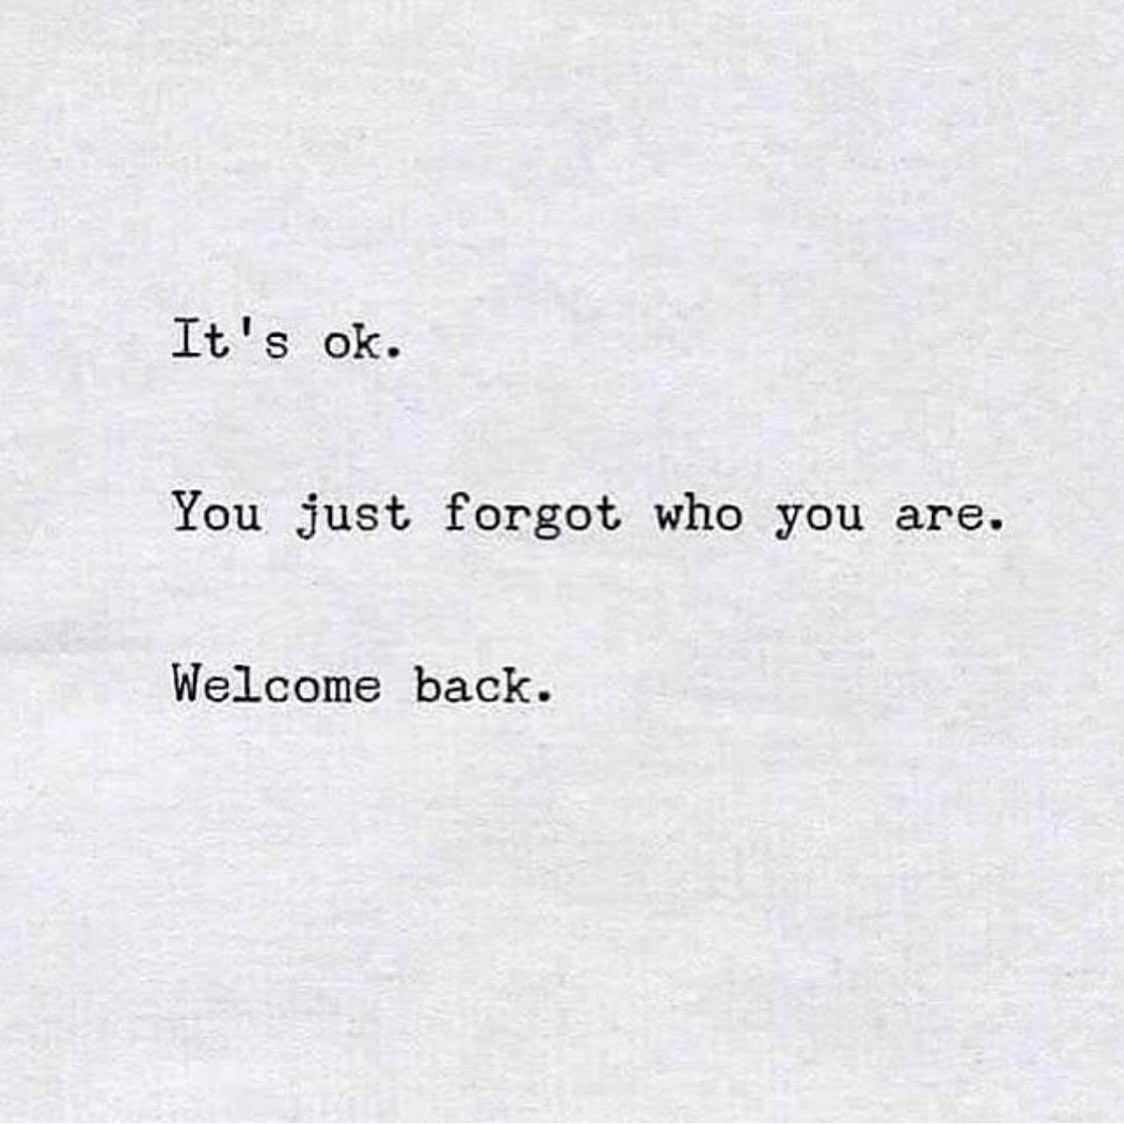 It's 0k. You just forgot who you are. Welcome back.